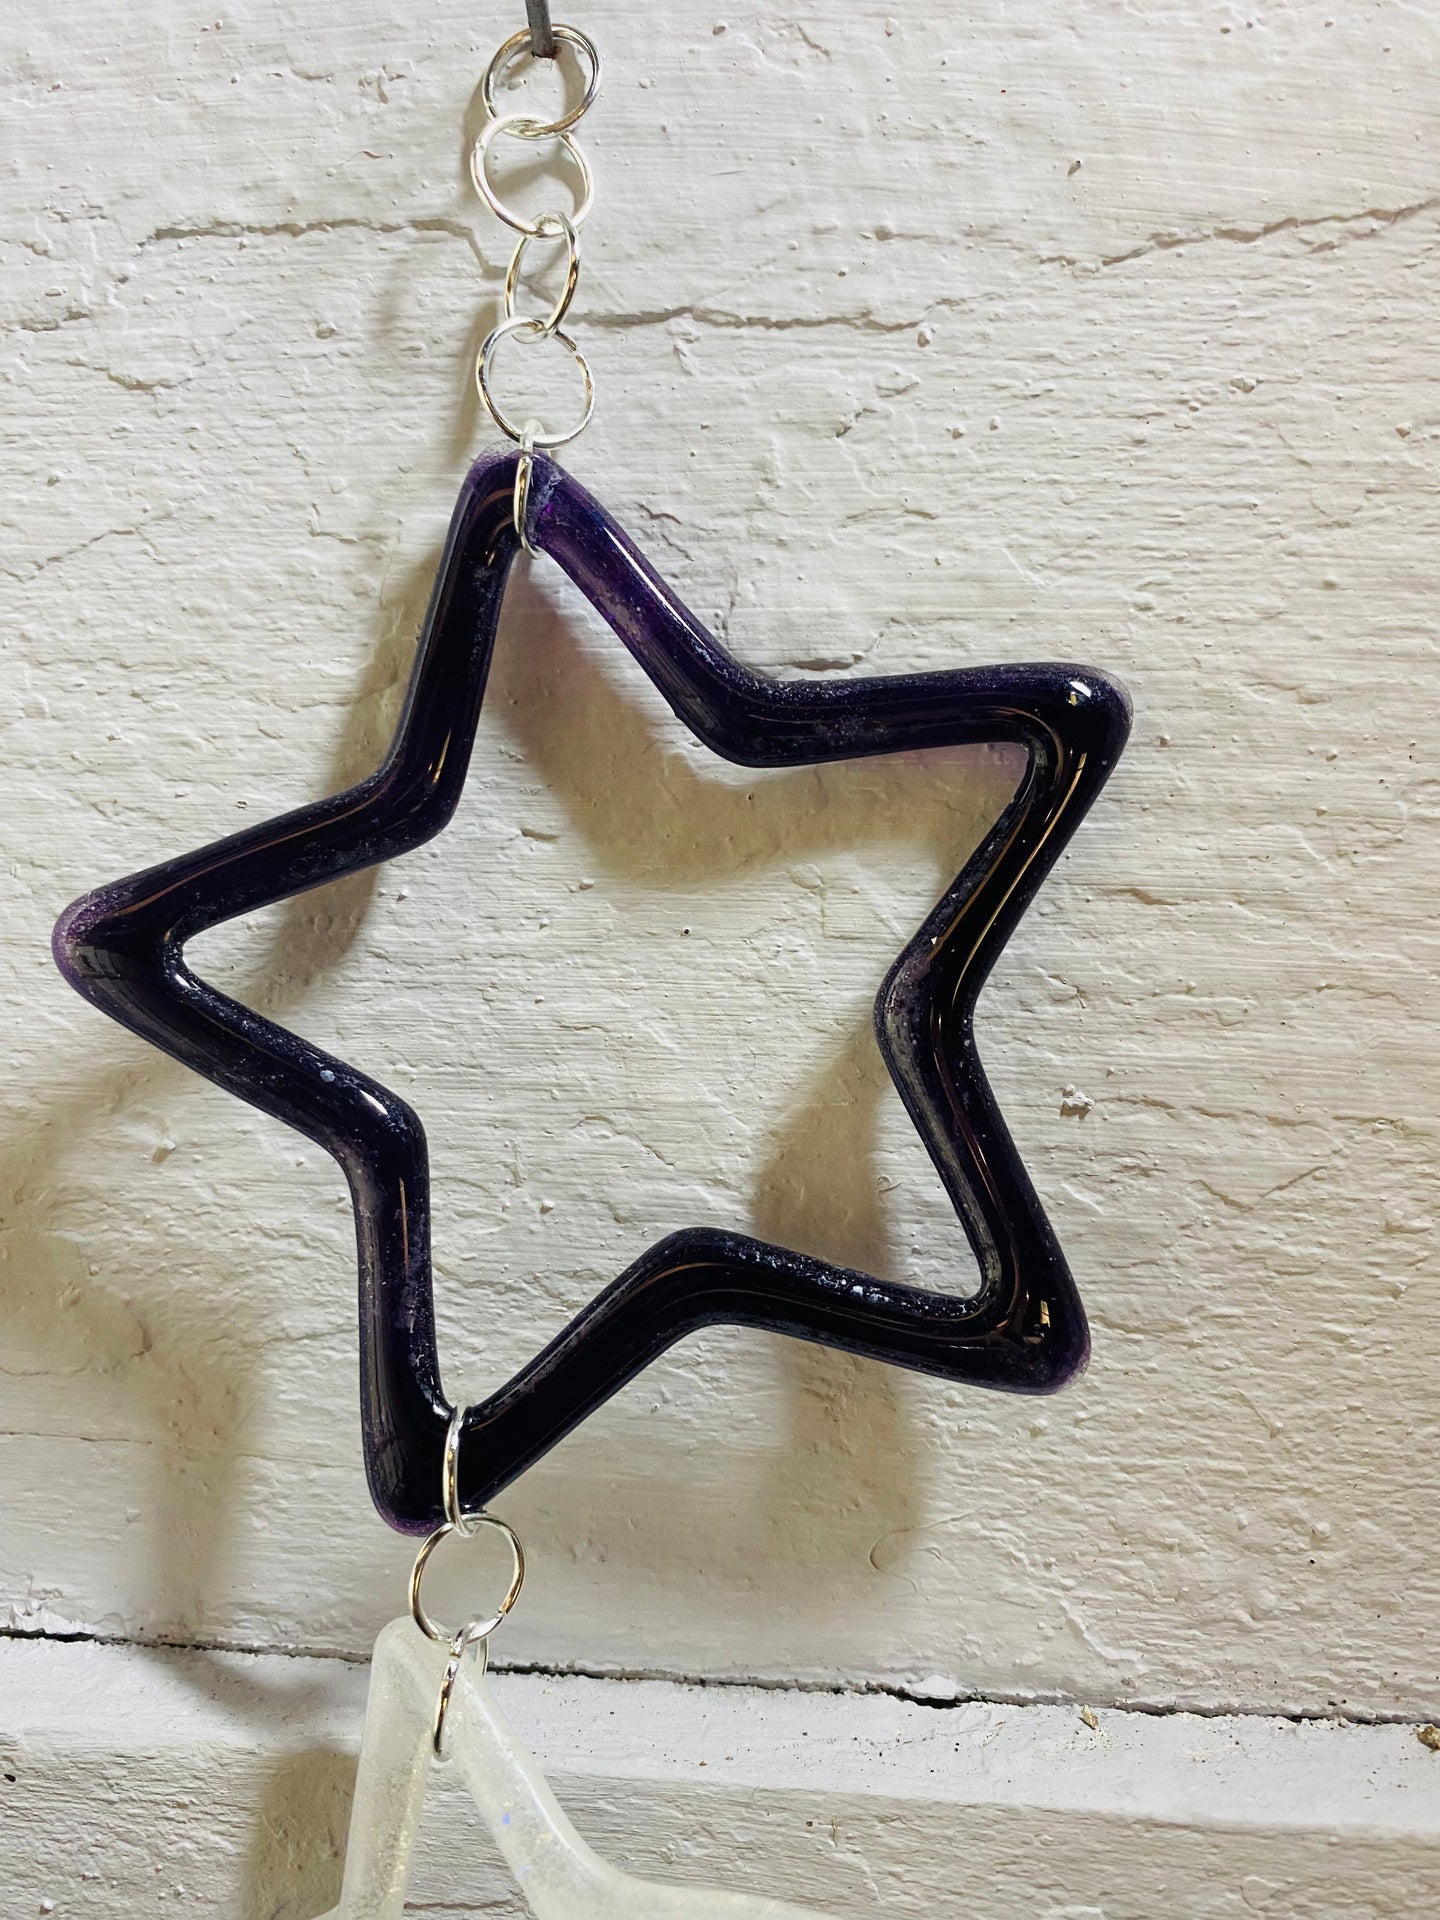 Chain of four hanging Stars